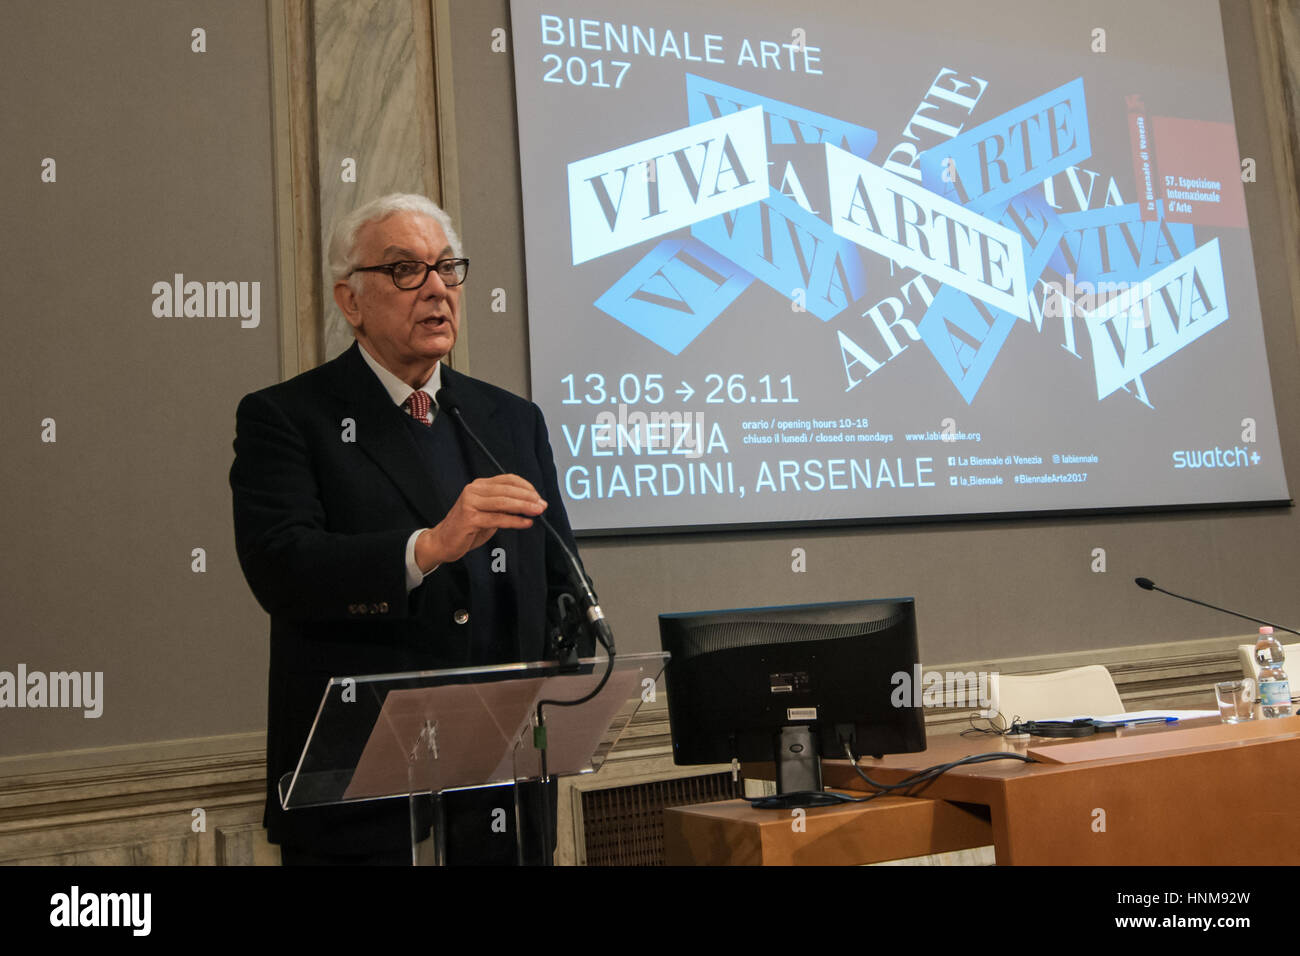 VENICE - FEBRUARY 06: Christine Macel and Paolo Baratta, curator and director, attend at the Press Conference for the 57 Venice Biennale Arte 2017. Stock Photo